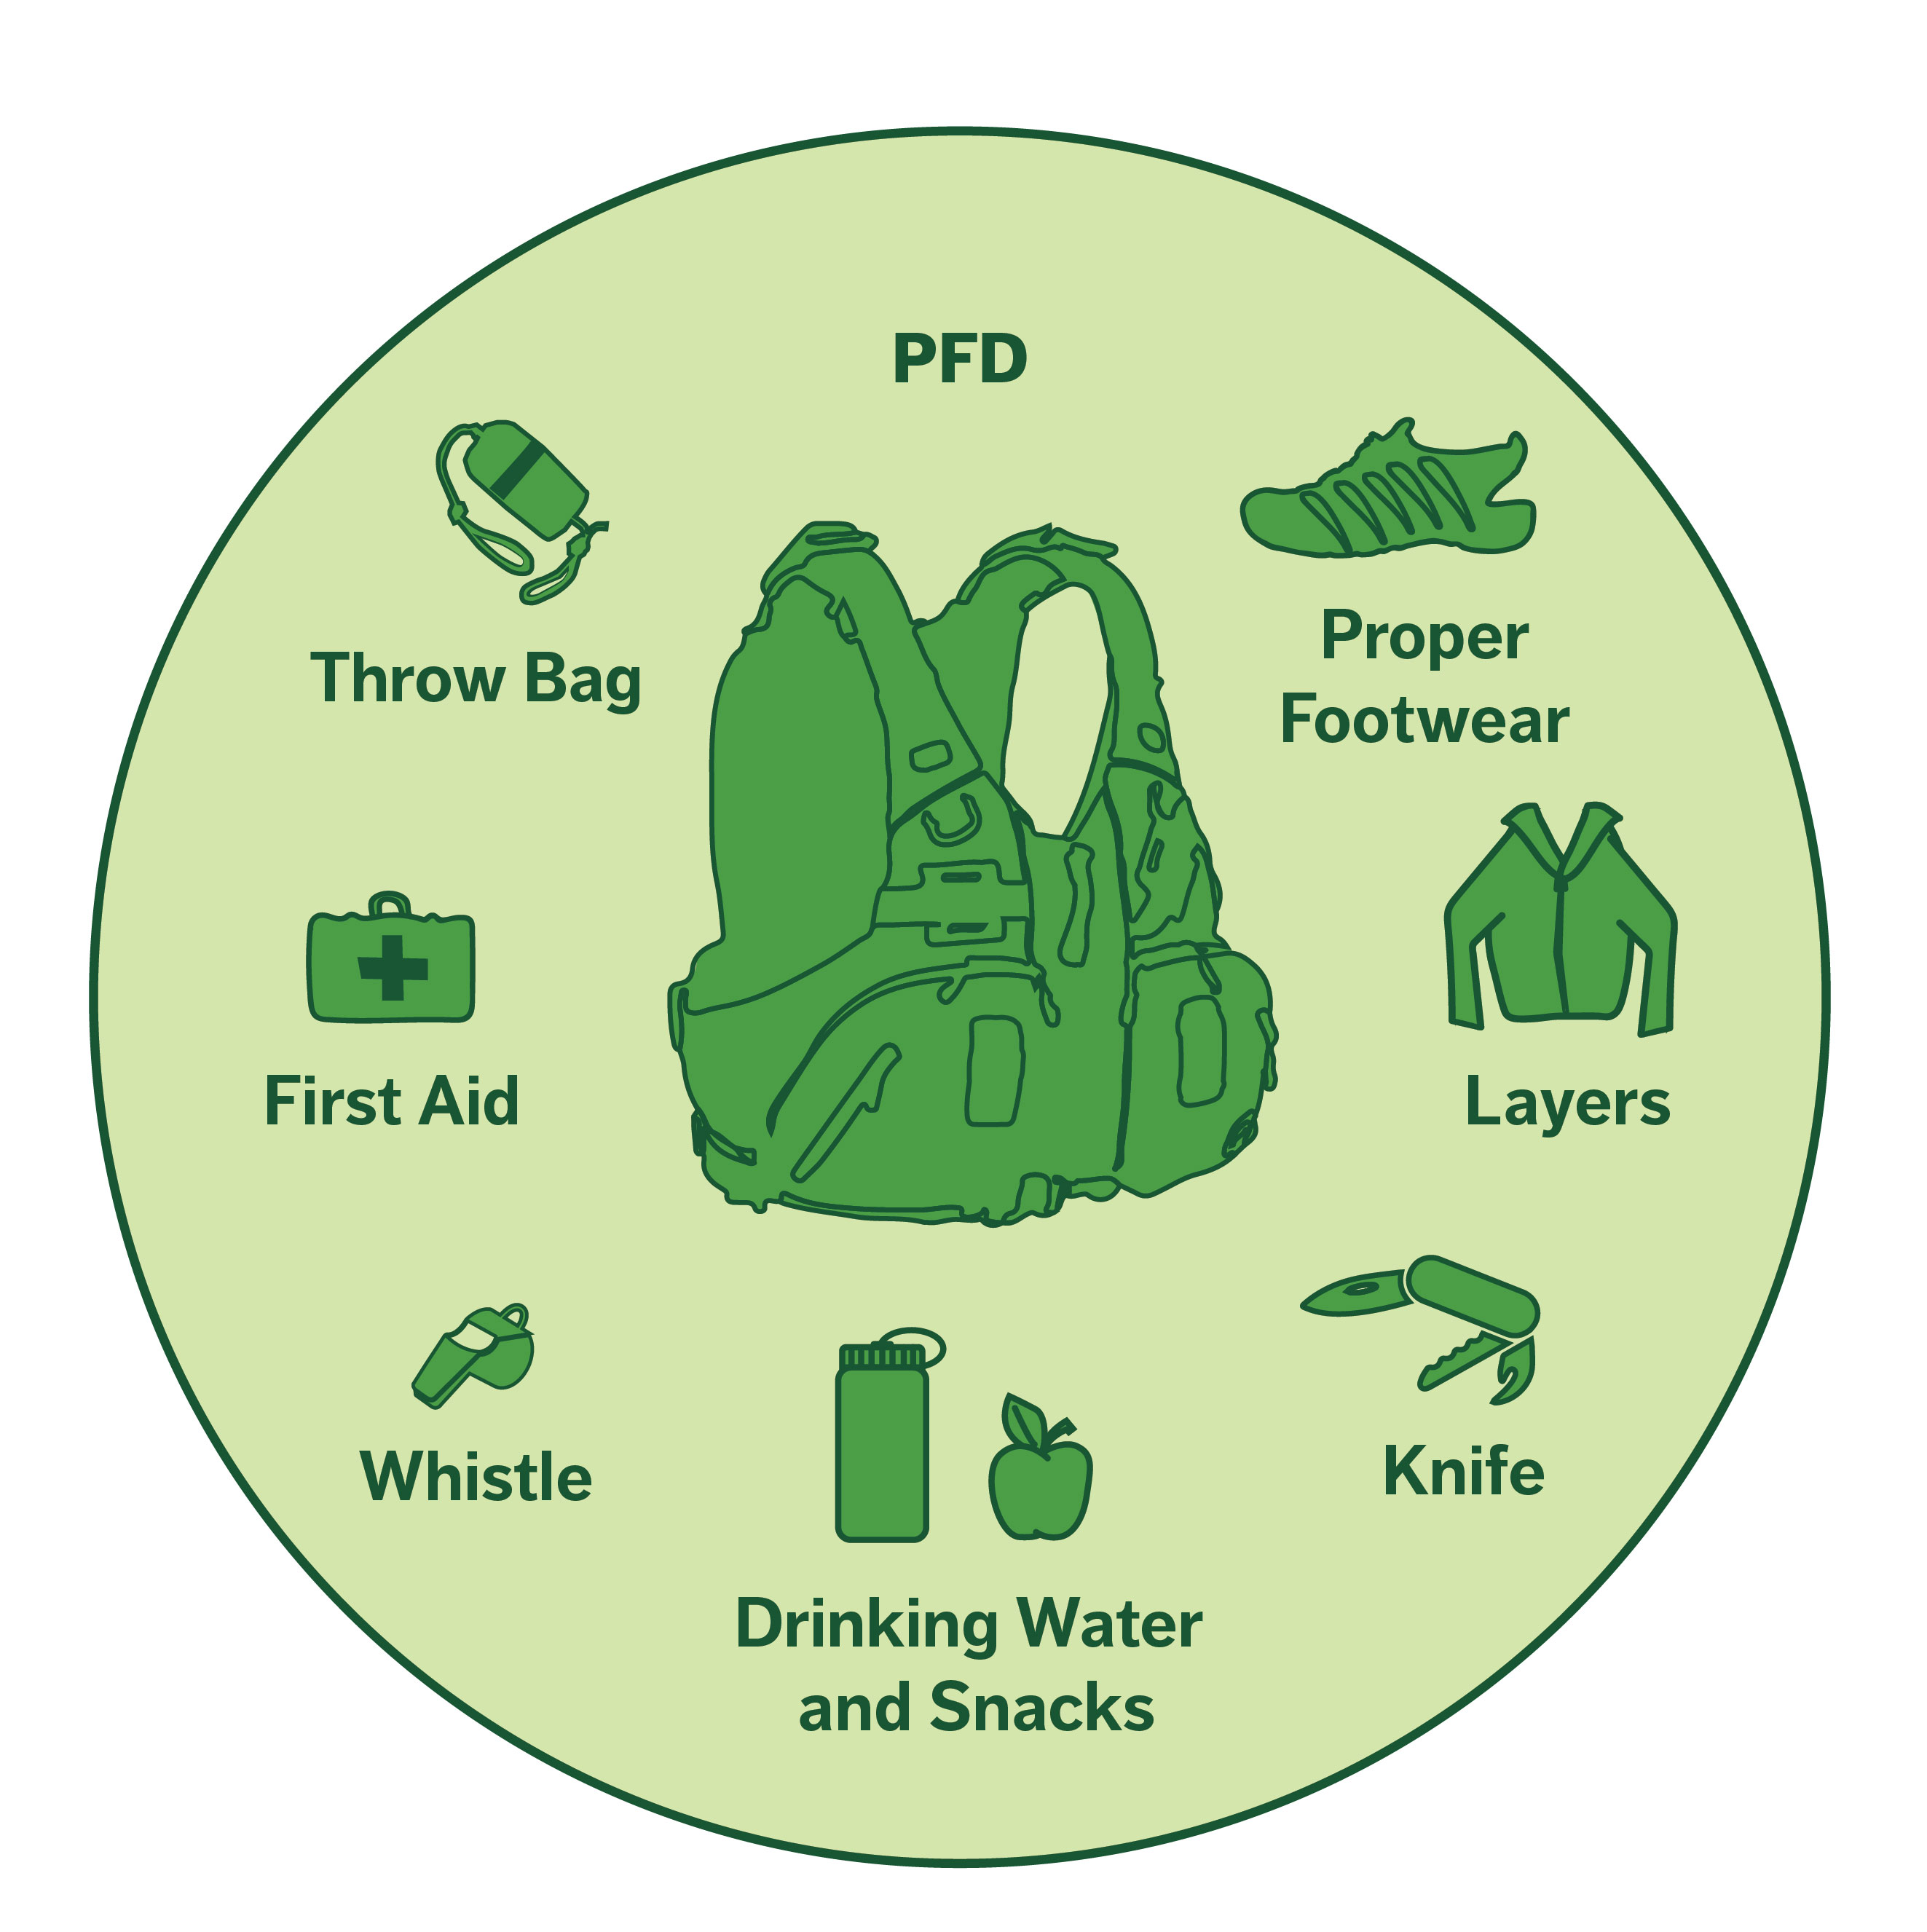 Graphic showing required equipment: Personal Flotation Device, proper footwear, Layers, knife, drinking water and snacks, whistle, first aid, throw bag